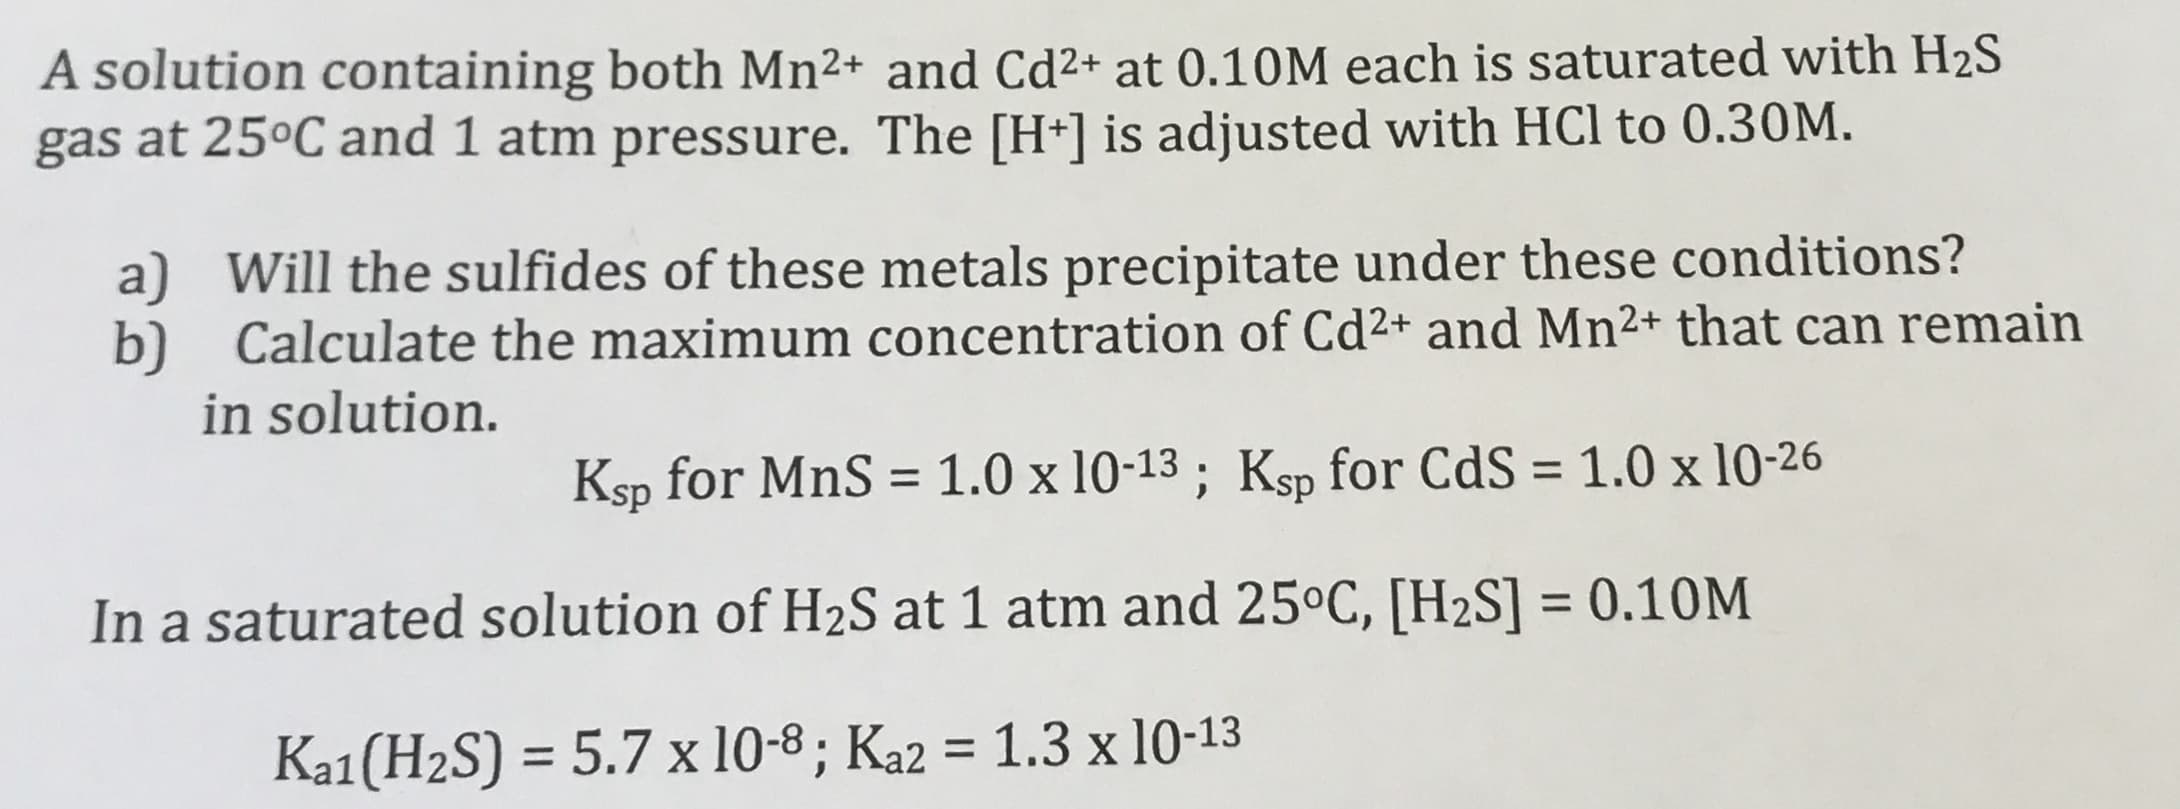 A solution containing both Mn2+ and Cd²+ at 0.10M each is saturated with H2S
gas at 25ºC and 1 atm pressure. The [H+] is adjusted with HCl to 0.30M.
a) Will the sulfides of these metals precipitate under these conditions?
b) Calculate the maximum concentration of Cd2+ and Mn²+ that can remain
in solution.
Ksp for MnS = 1.0 x 10-13 ; Ksp for CdS = 1.0 x 10-26
%3D
In a saturated solution of H2S at 1 atm and 25°C, [H2S] = 0.10M
%3D
Ka1(H2S) = 5.7 x 10-8 ; Ka2 = 1.3 x 10-13
